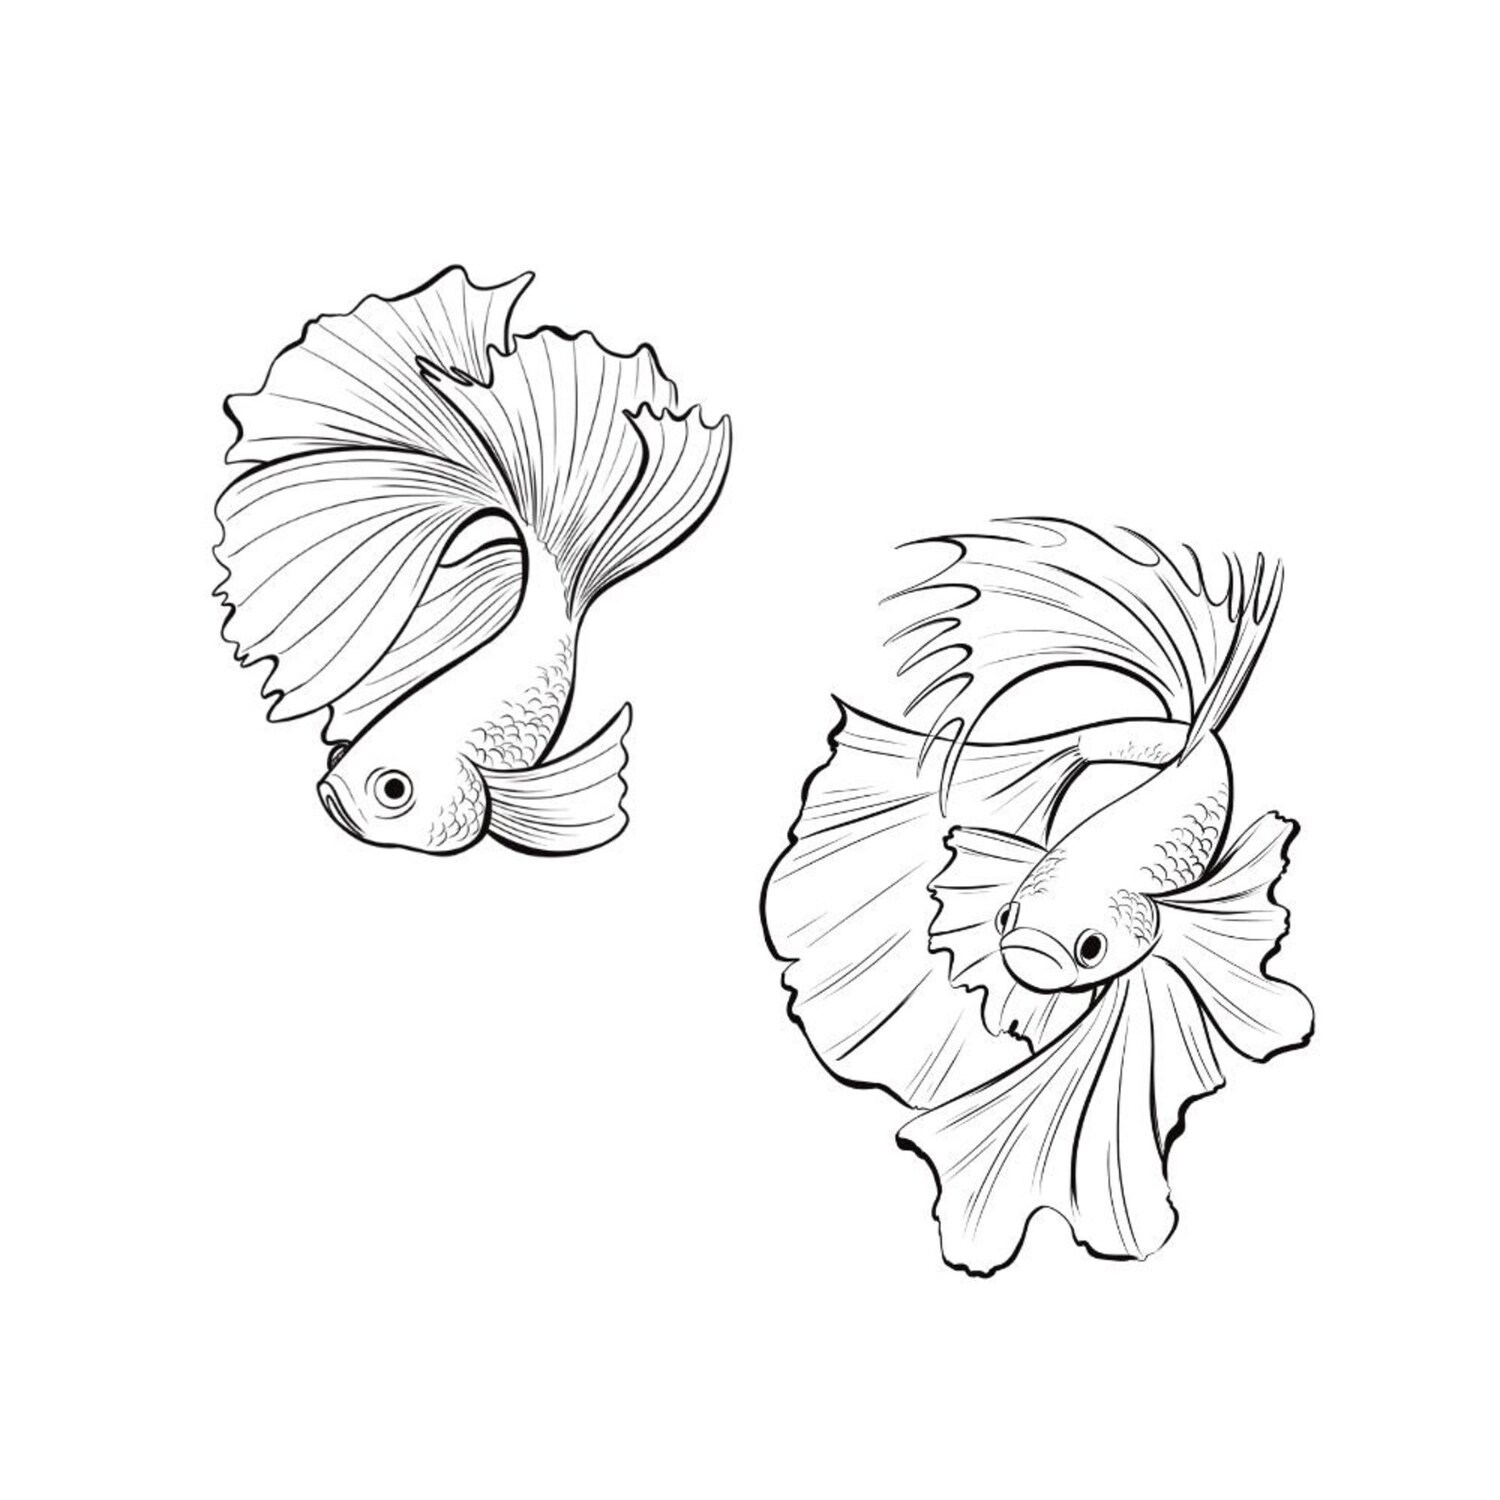 Detailed Fish Line art Clipart Black and White png svg cover.